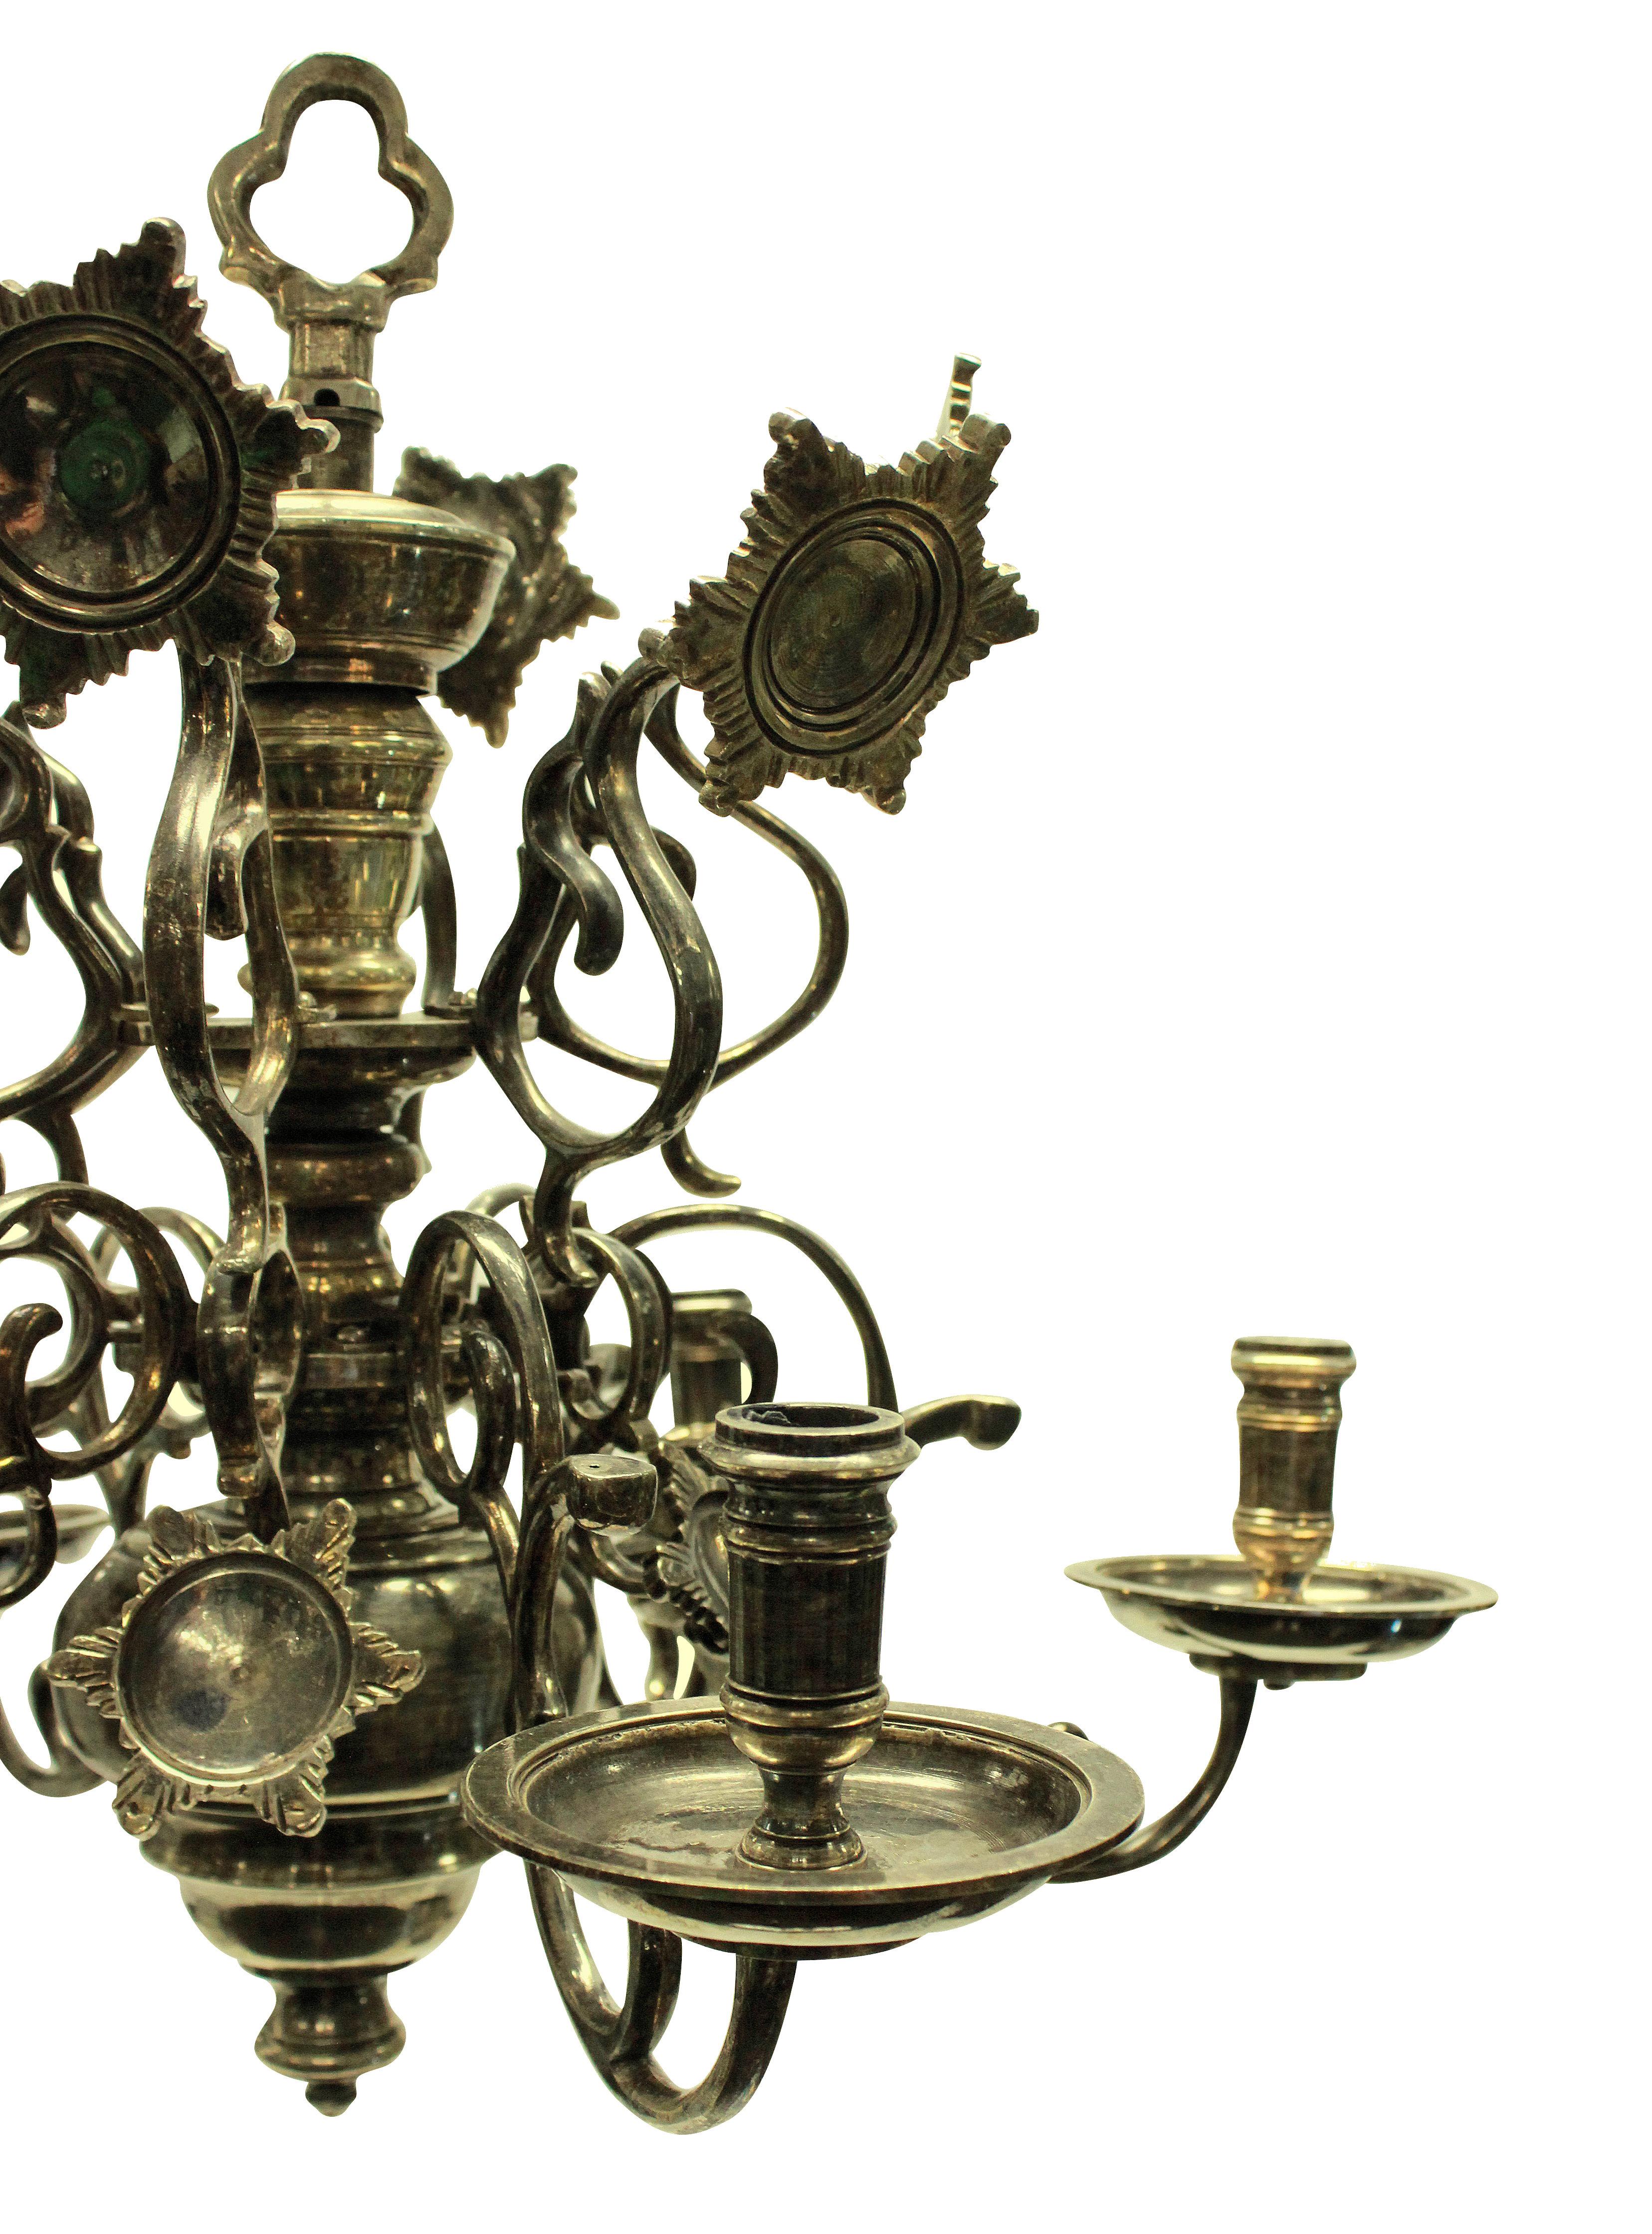 A Flemish silver plated brass chandelier, with reflectors and individually numbered arms.